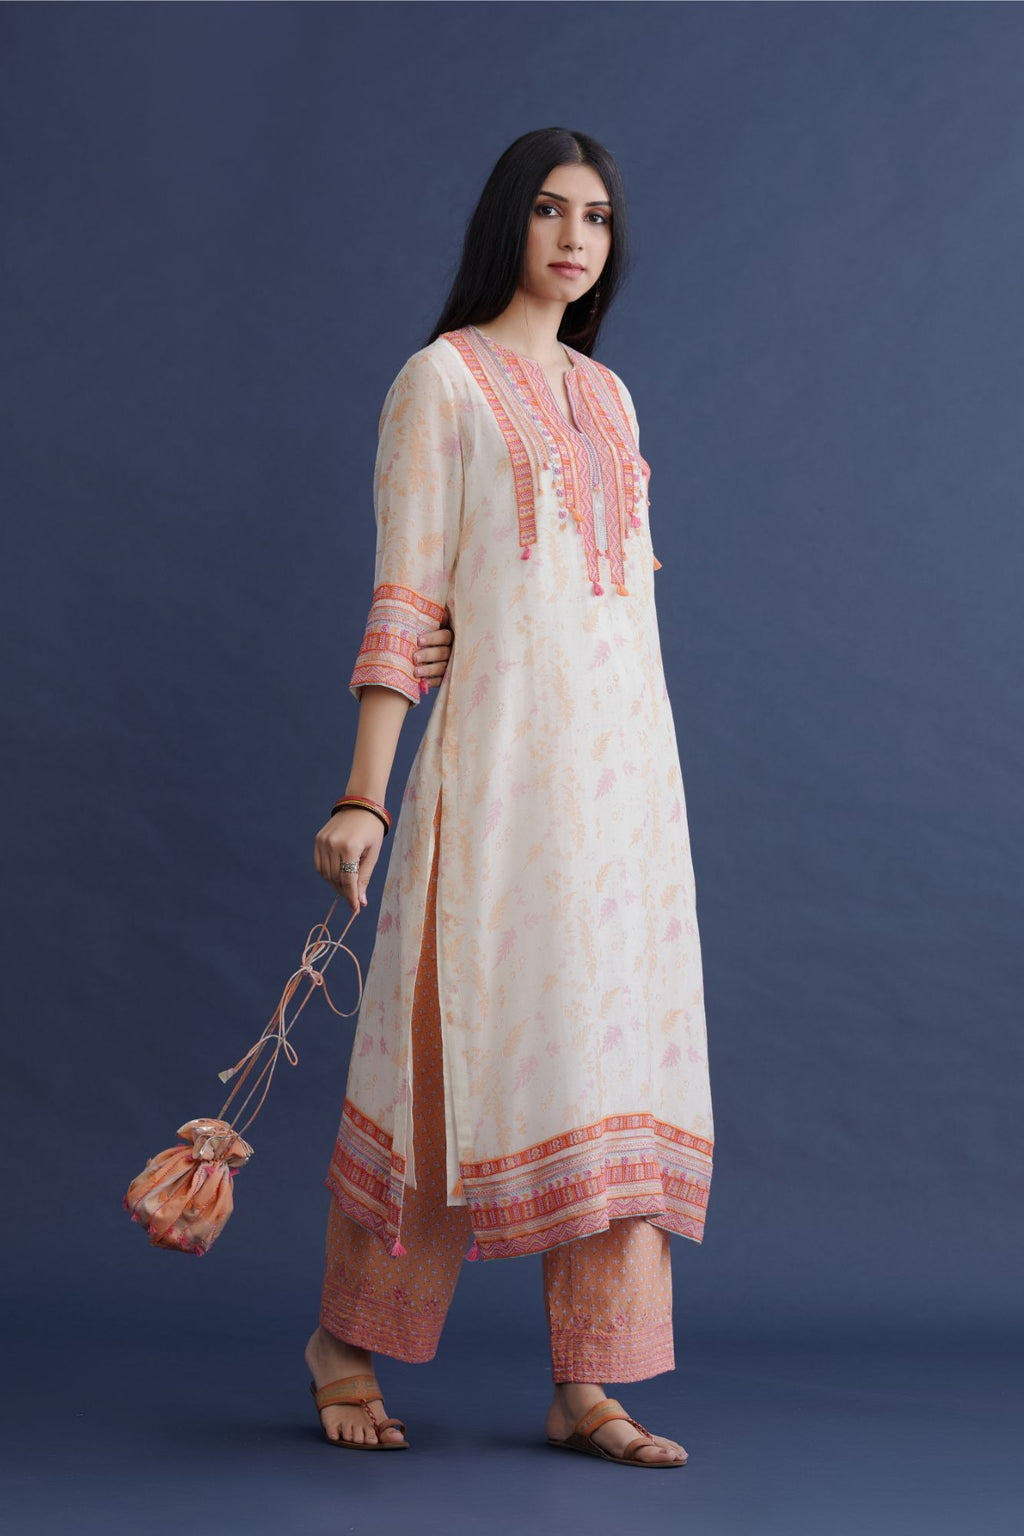 Off white hand block printed straight kurta set with pink and orange thread embroidery and delicate beaded hand work at neck, sleeve and hem